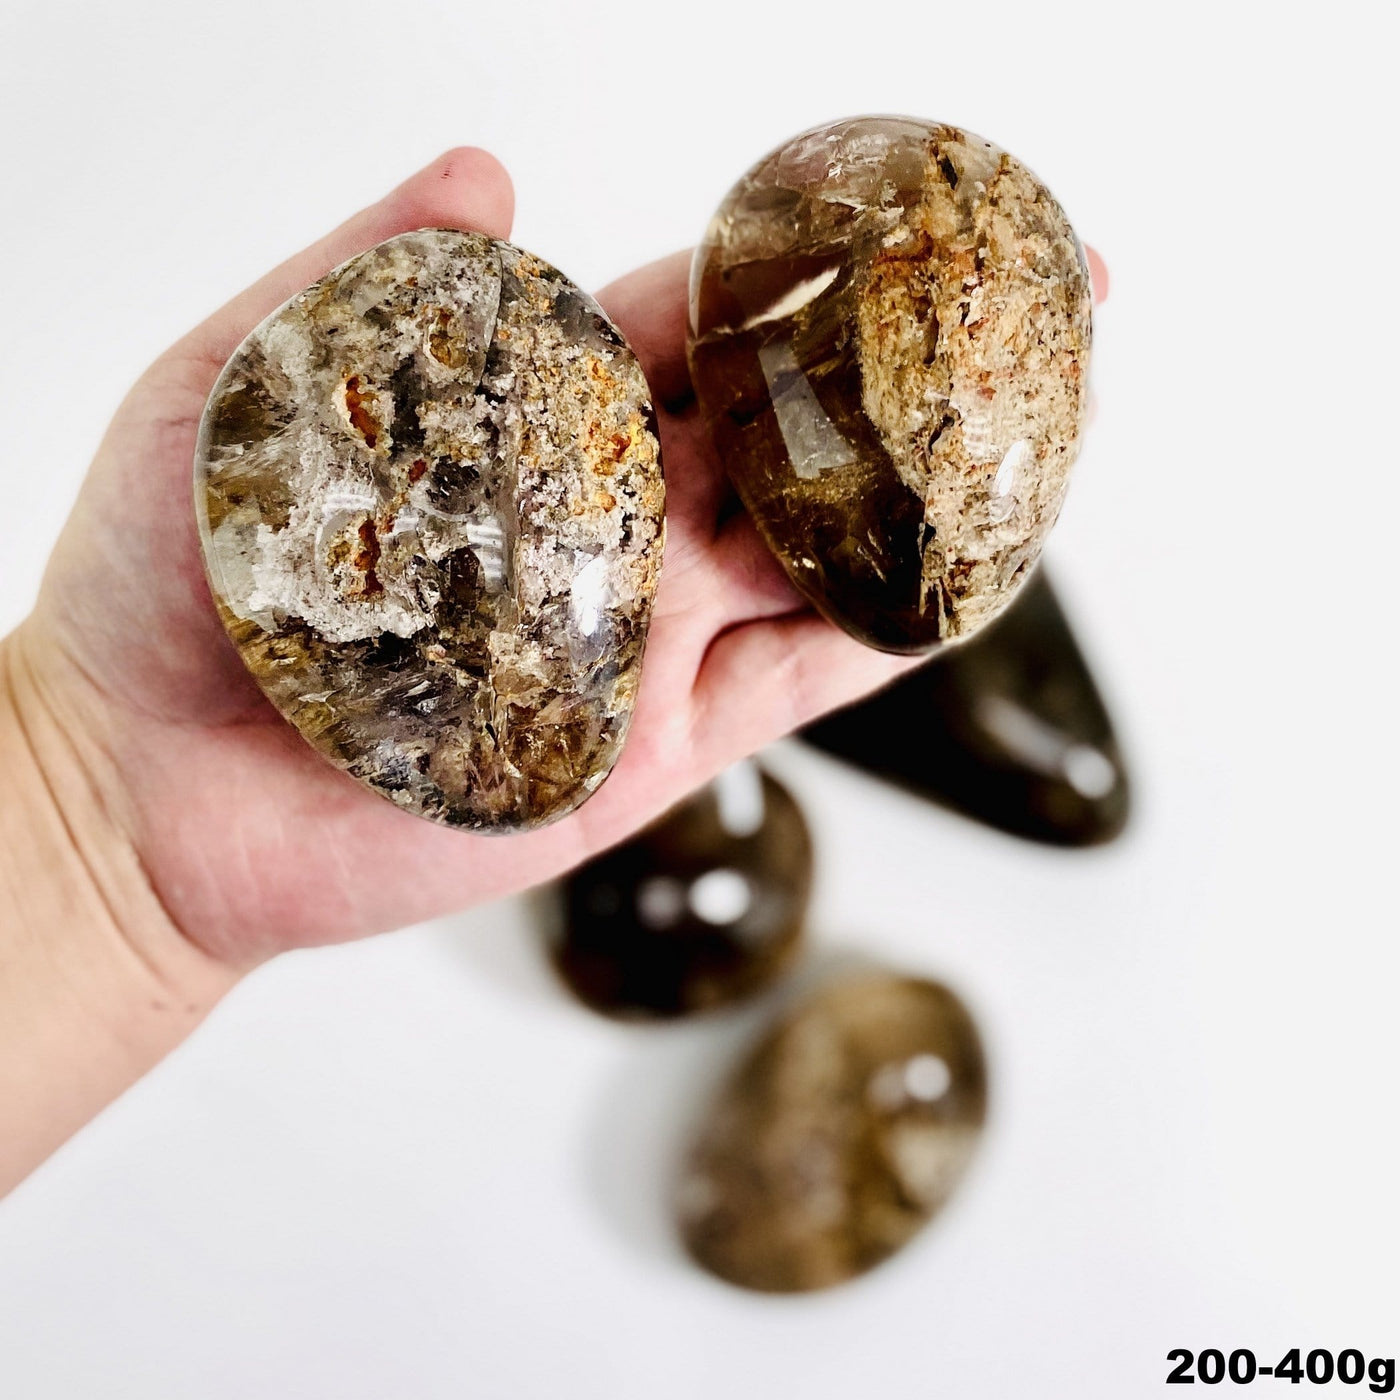 Lodolite tumbled stone assortment on a white background with two held in a man's hand